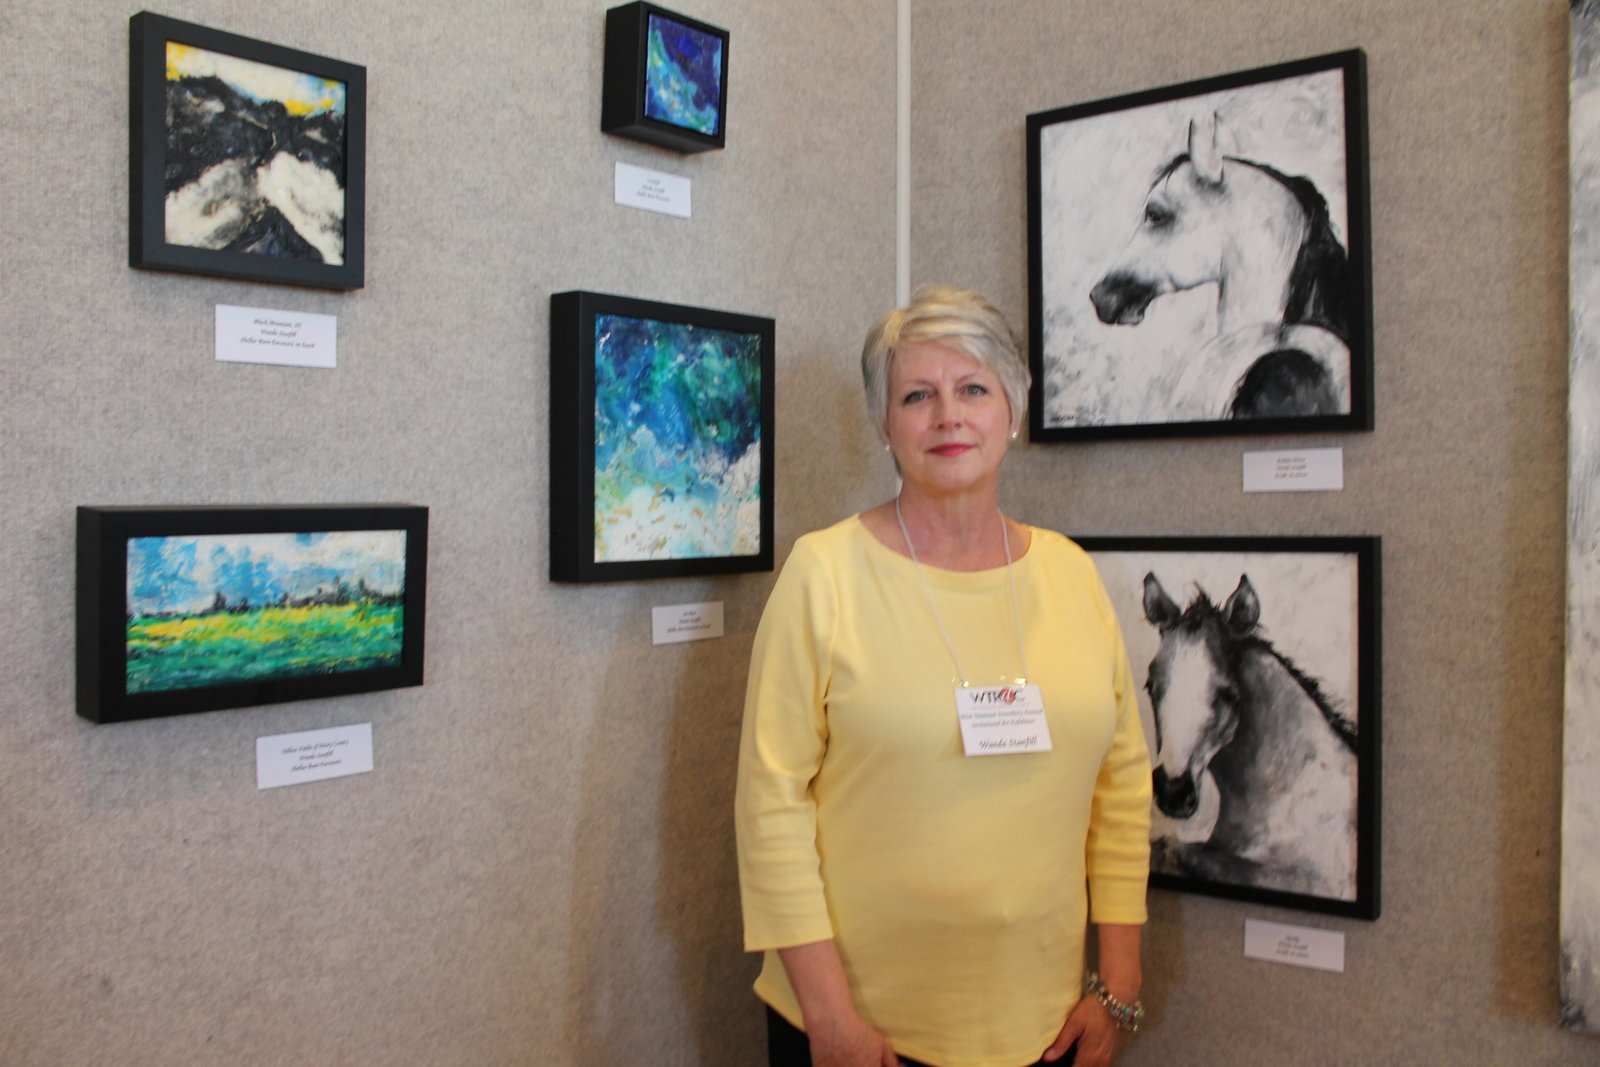 West Tennessee Strawberry Festival - Art Show - Wanda Stanfill